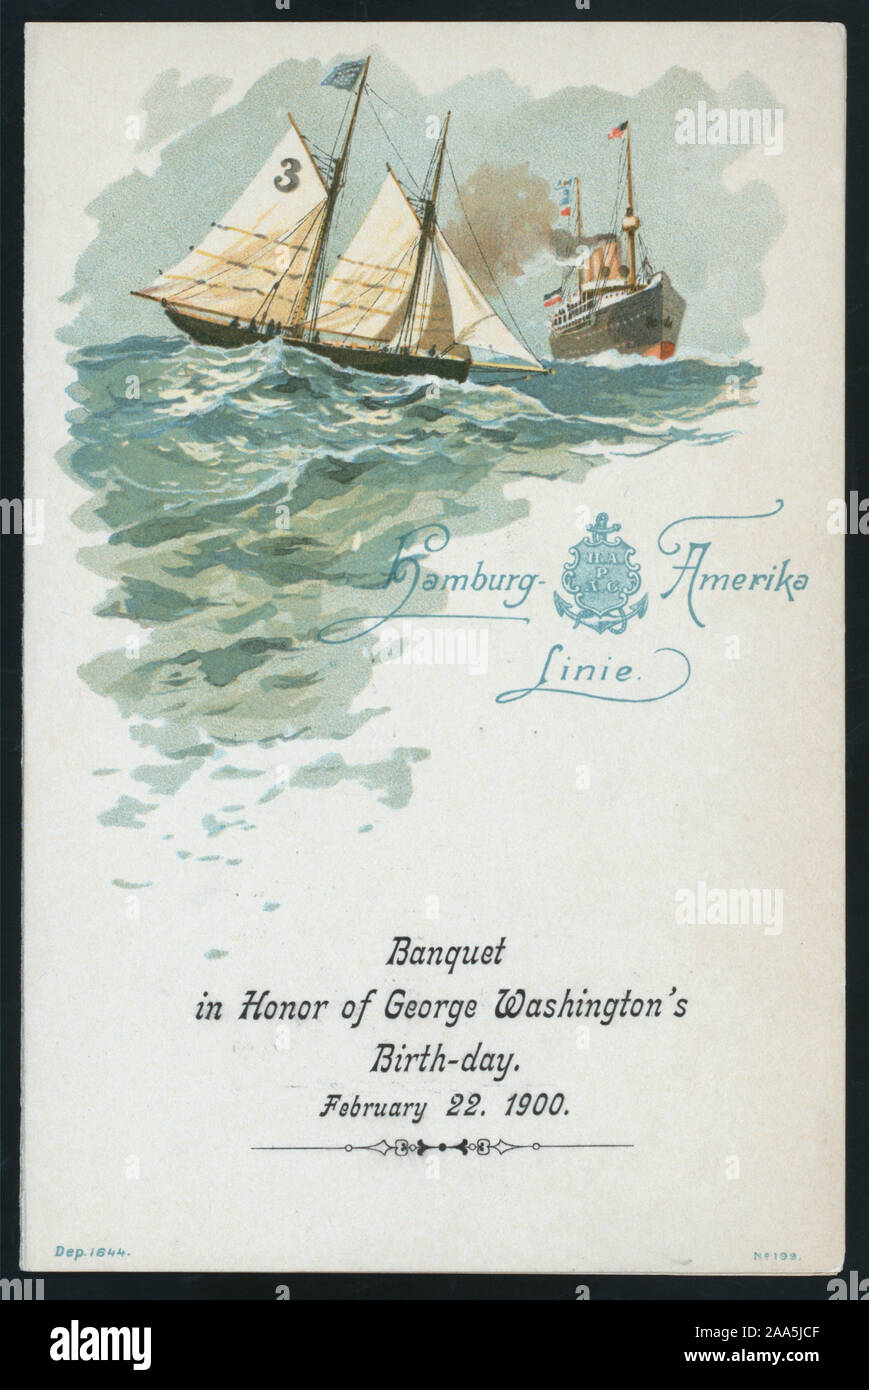 ALL MENU ITEMS DESCRIBED WITH AMERICAN NAMES; MARITIME SCENE ON COVER; CONCERT PROGRAM (ALL AMERICAN MUSIC) ON BACK COVER; BANQUET IN HONOR OF GEORGE WASHINGTON'S BIRTHDAY [held by] HAMBURG-AMERIKA LINIE [at] SCHNELLDAMPFER COLUMBIA (SS;) Stock Photo